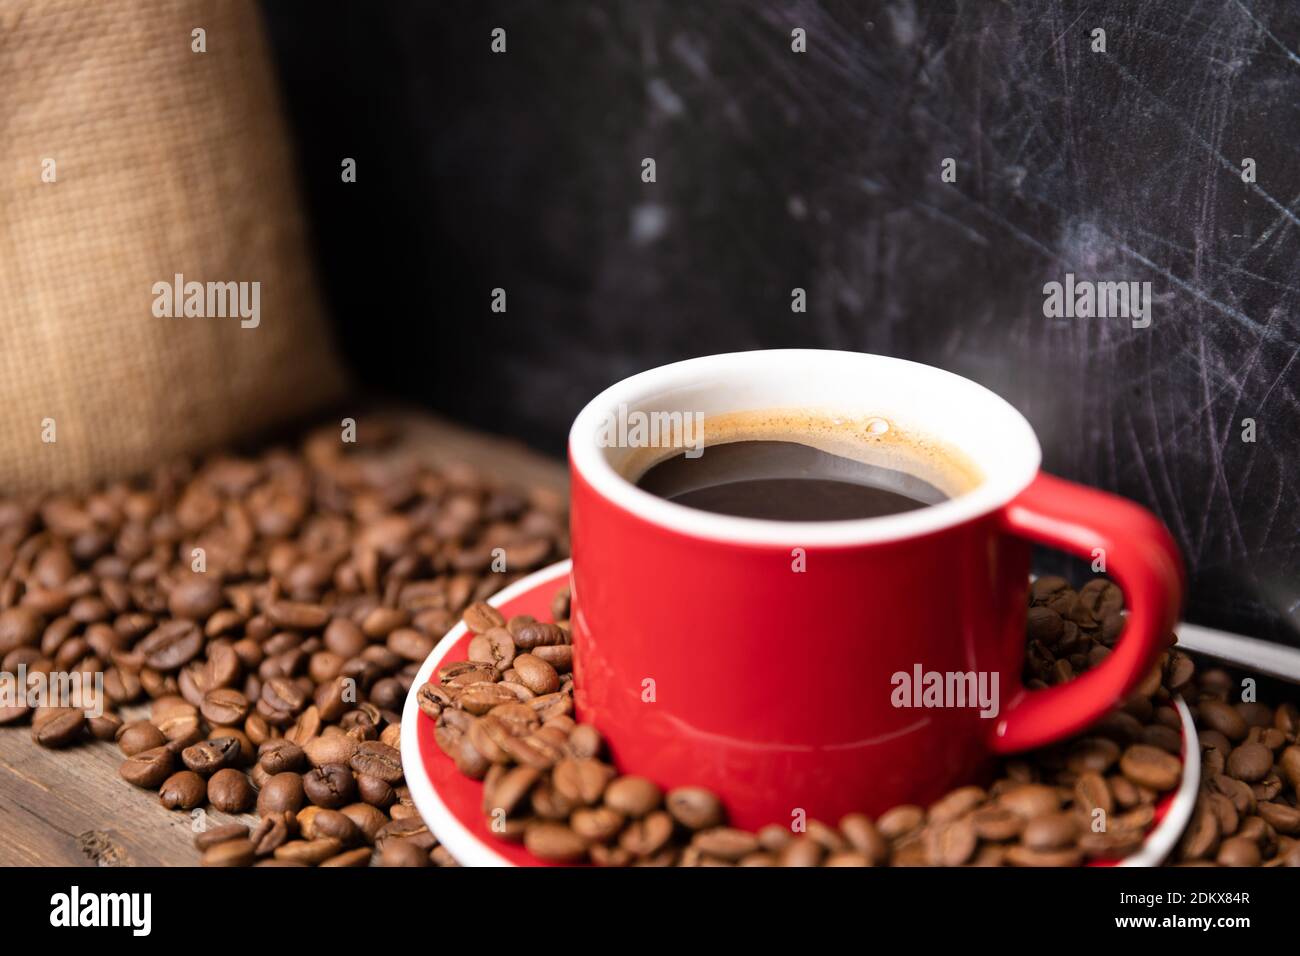 Red cup of coffee with coffee beans on dark textured background. Morning fresh energy concept. Stock Photo